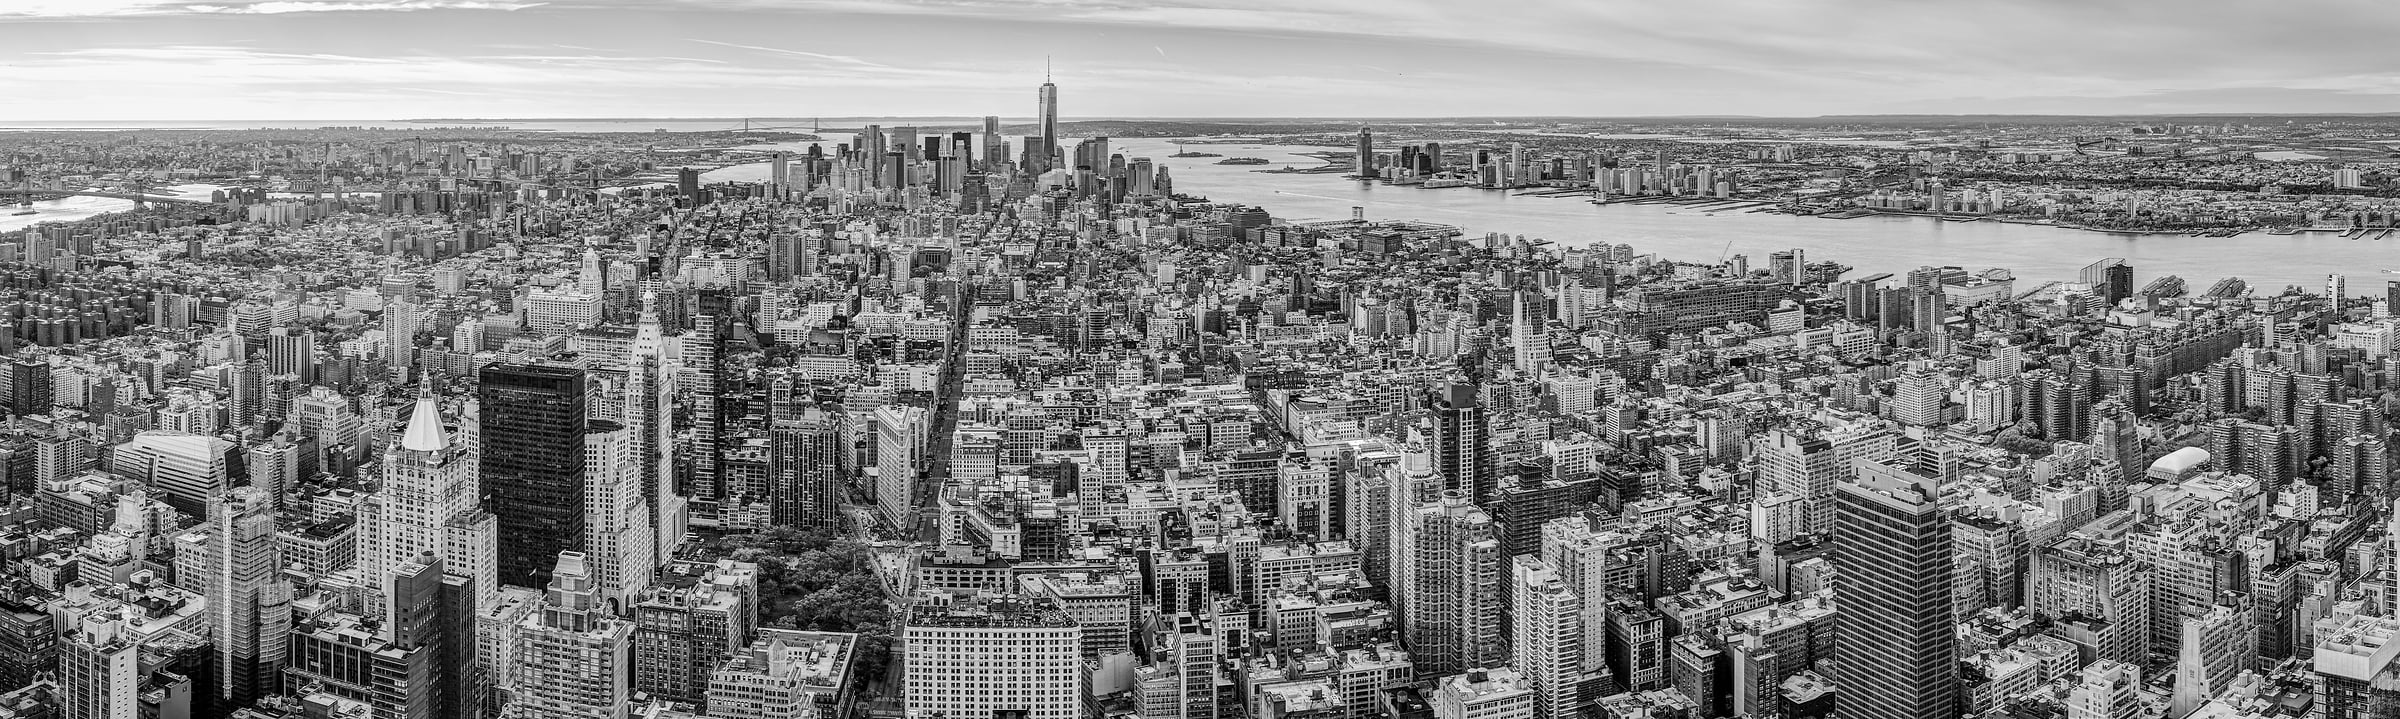 416 megapixels! A very high resolution, black & white aerial photo of New York City; cityscape photograph created by Tim Lo Monaco at the Empire State Building in Manhattan, New York City, New York